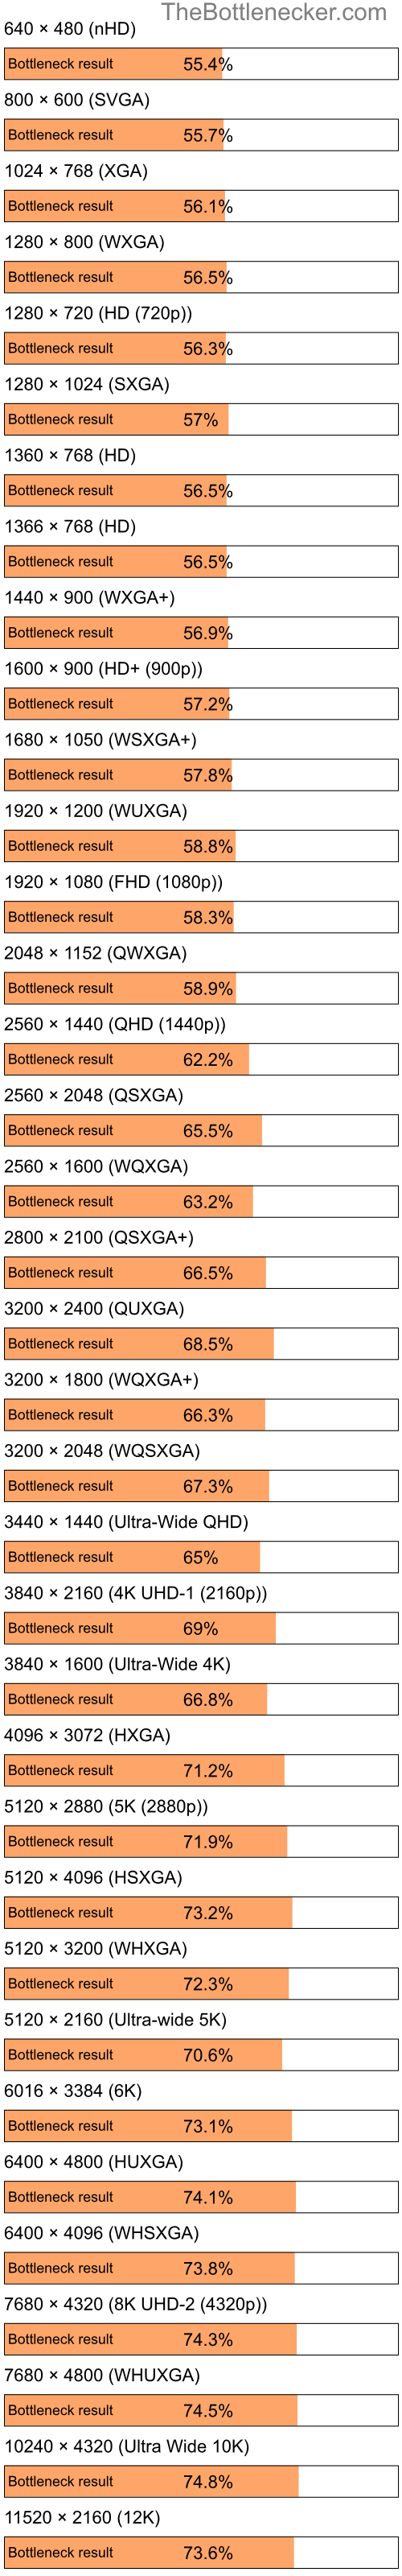 Bottleneck results by resolution for Intel Pentium 4 and AMD FirePro 2260 in General Tasks